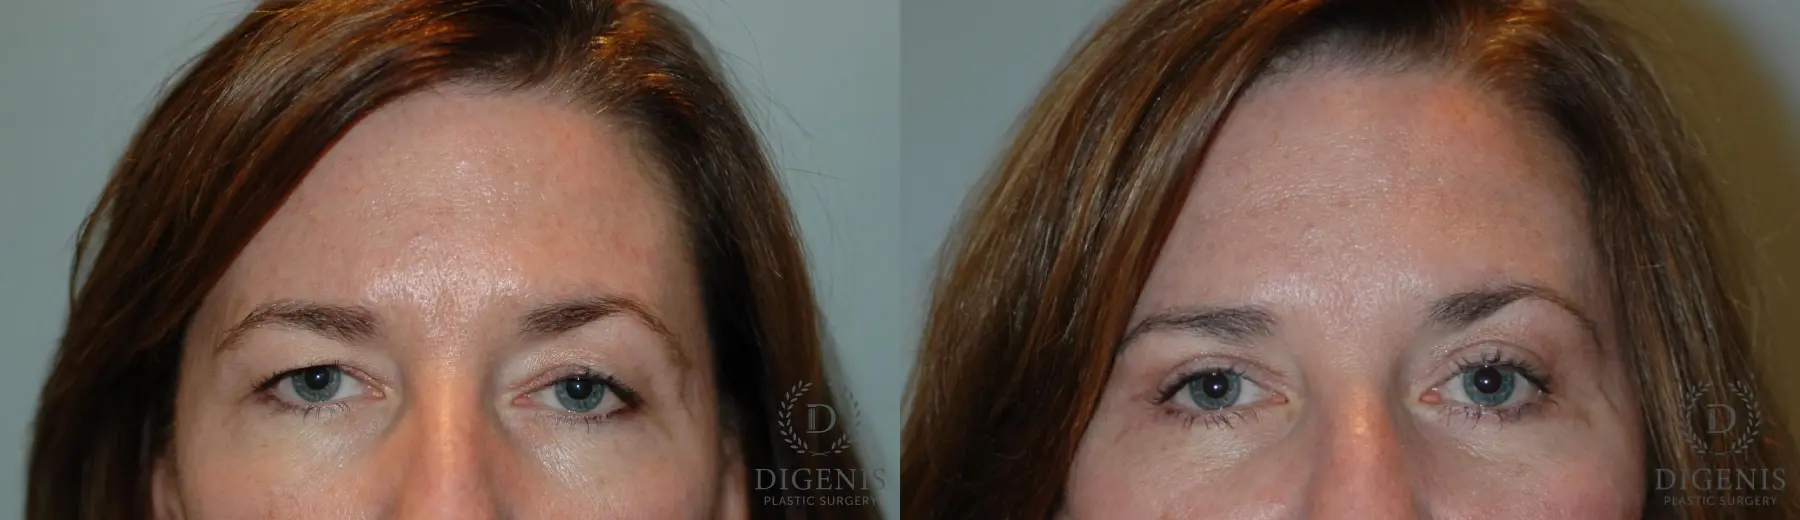 Eyelid Surgery: Patient 3 - Before and After  